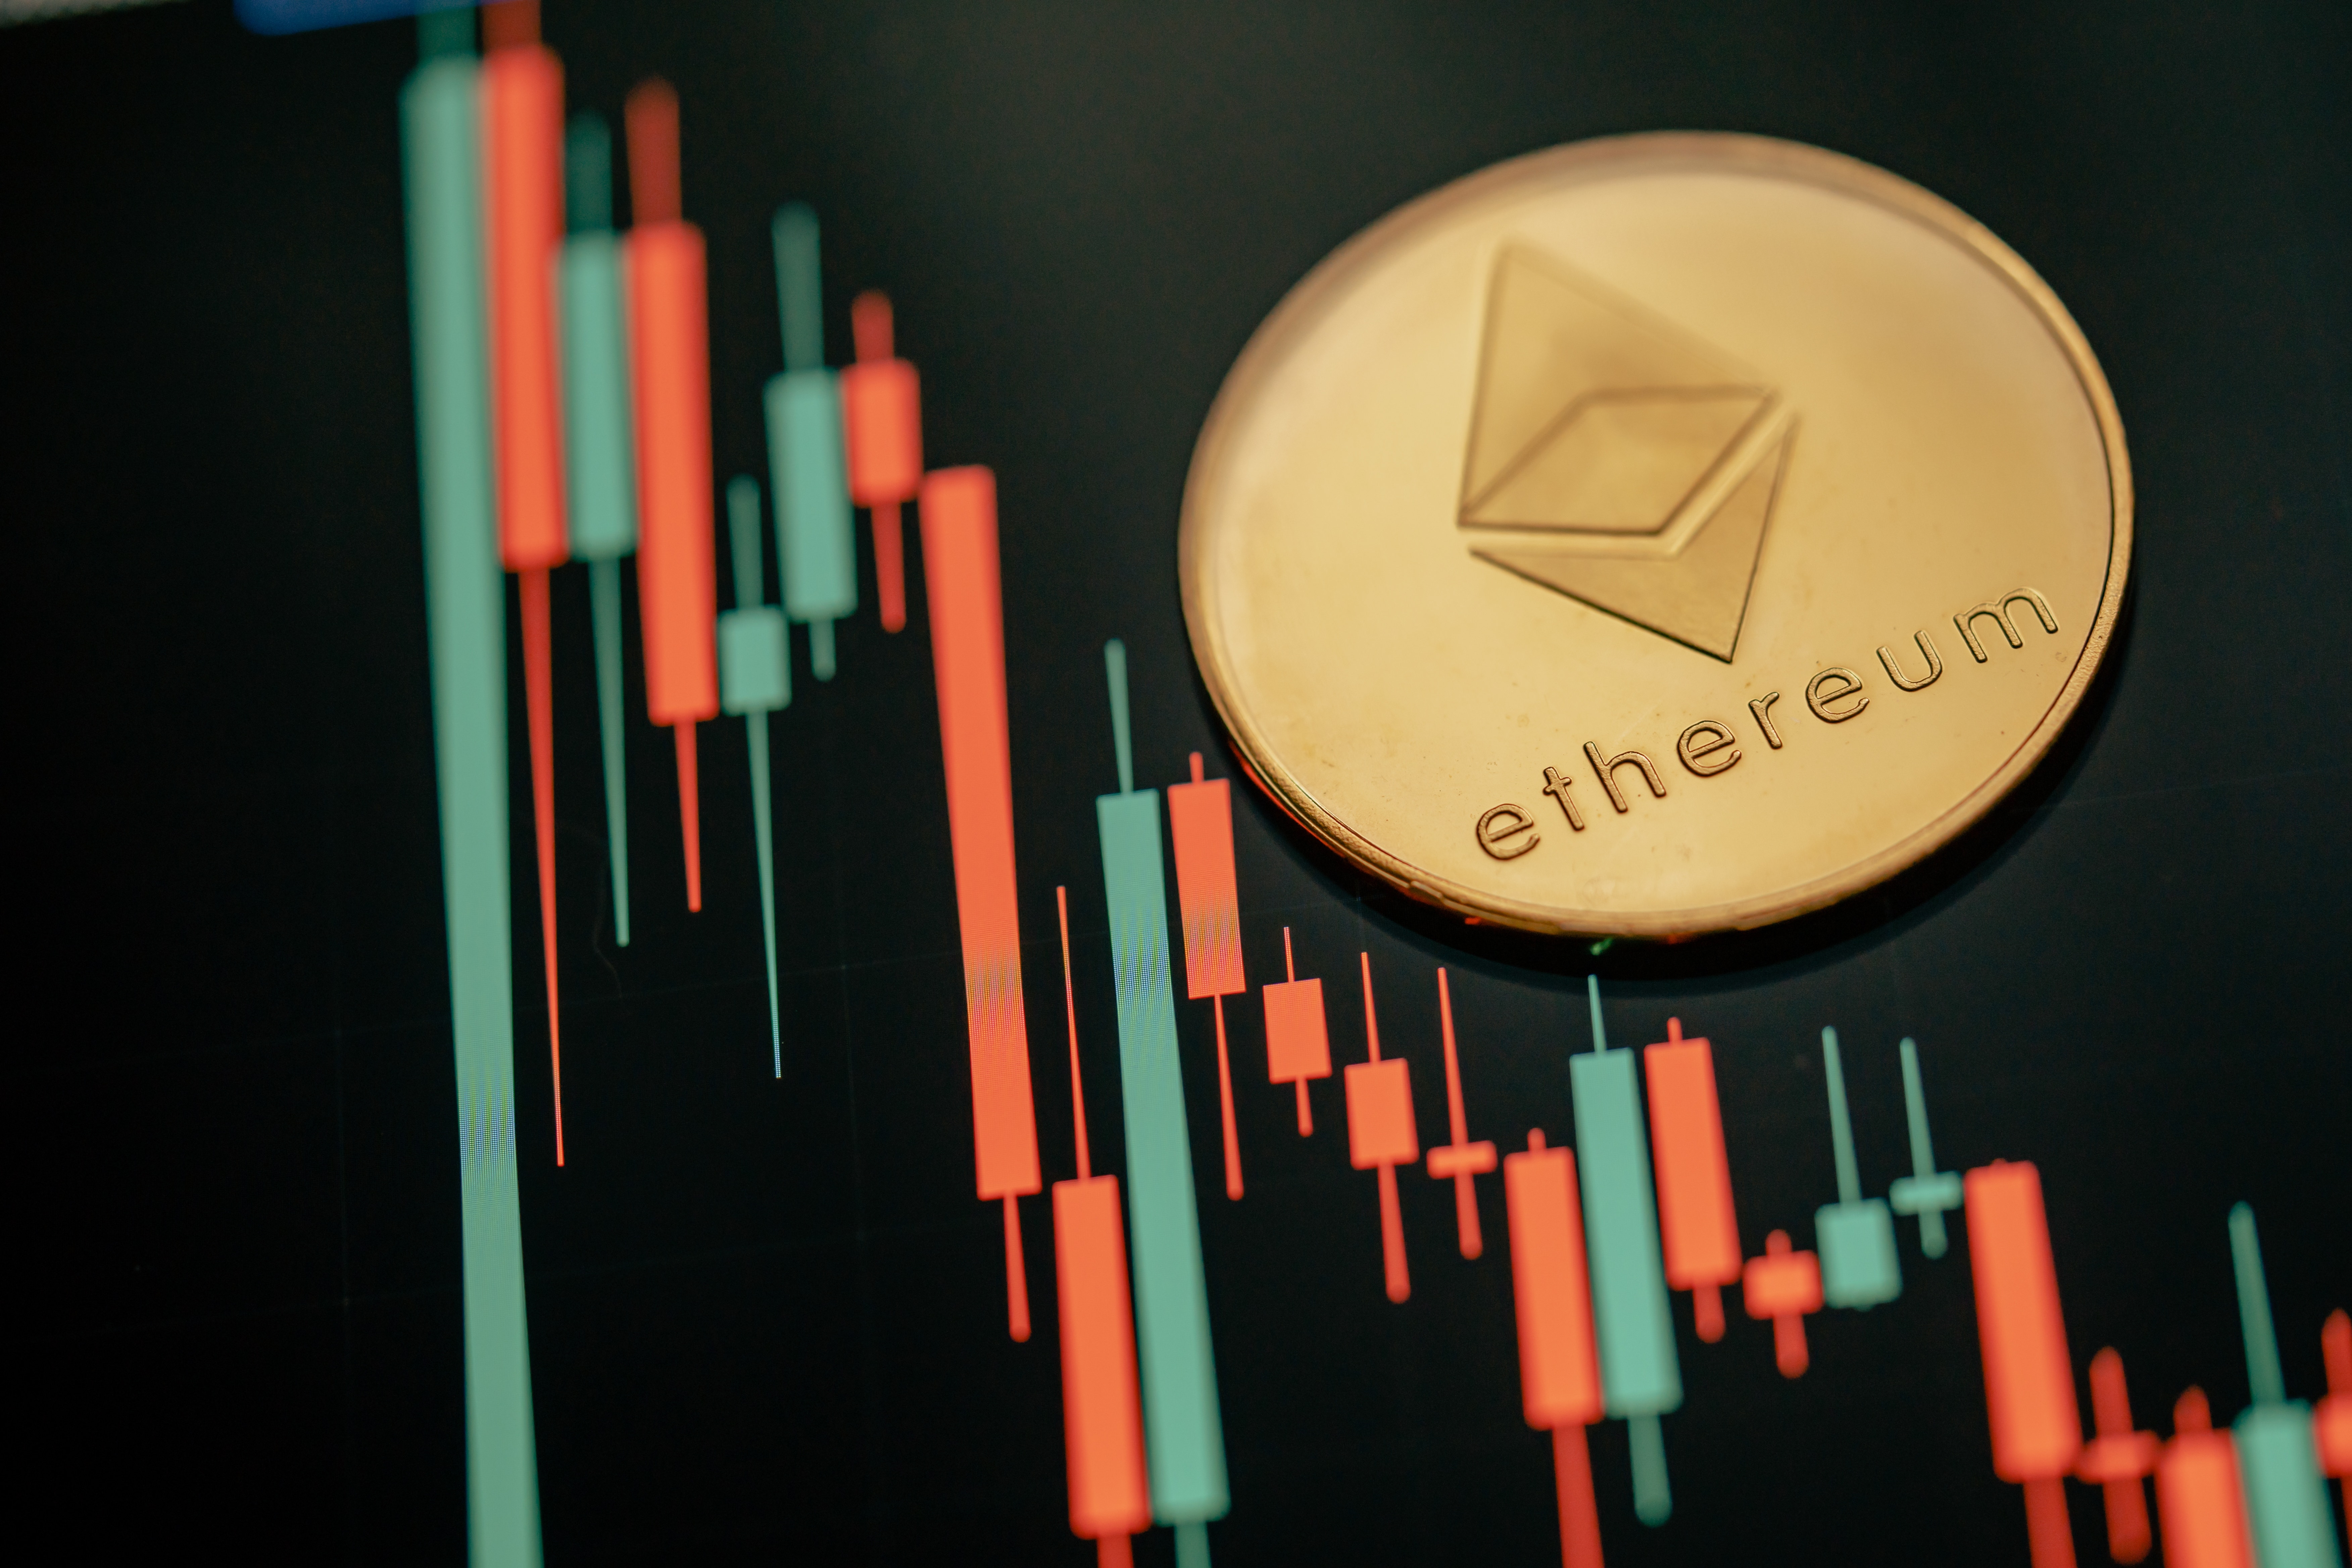 Ethereum Versus The S&P 500 - Where Should You Focus?